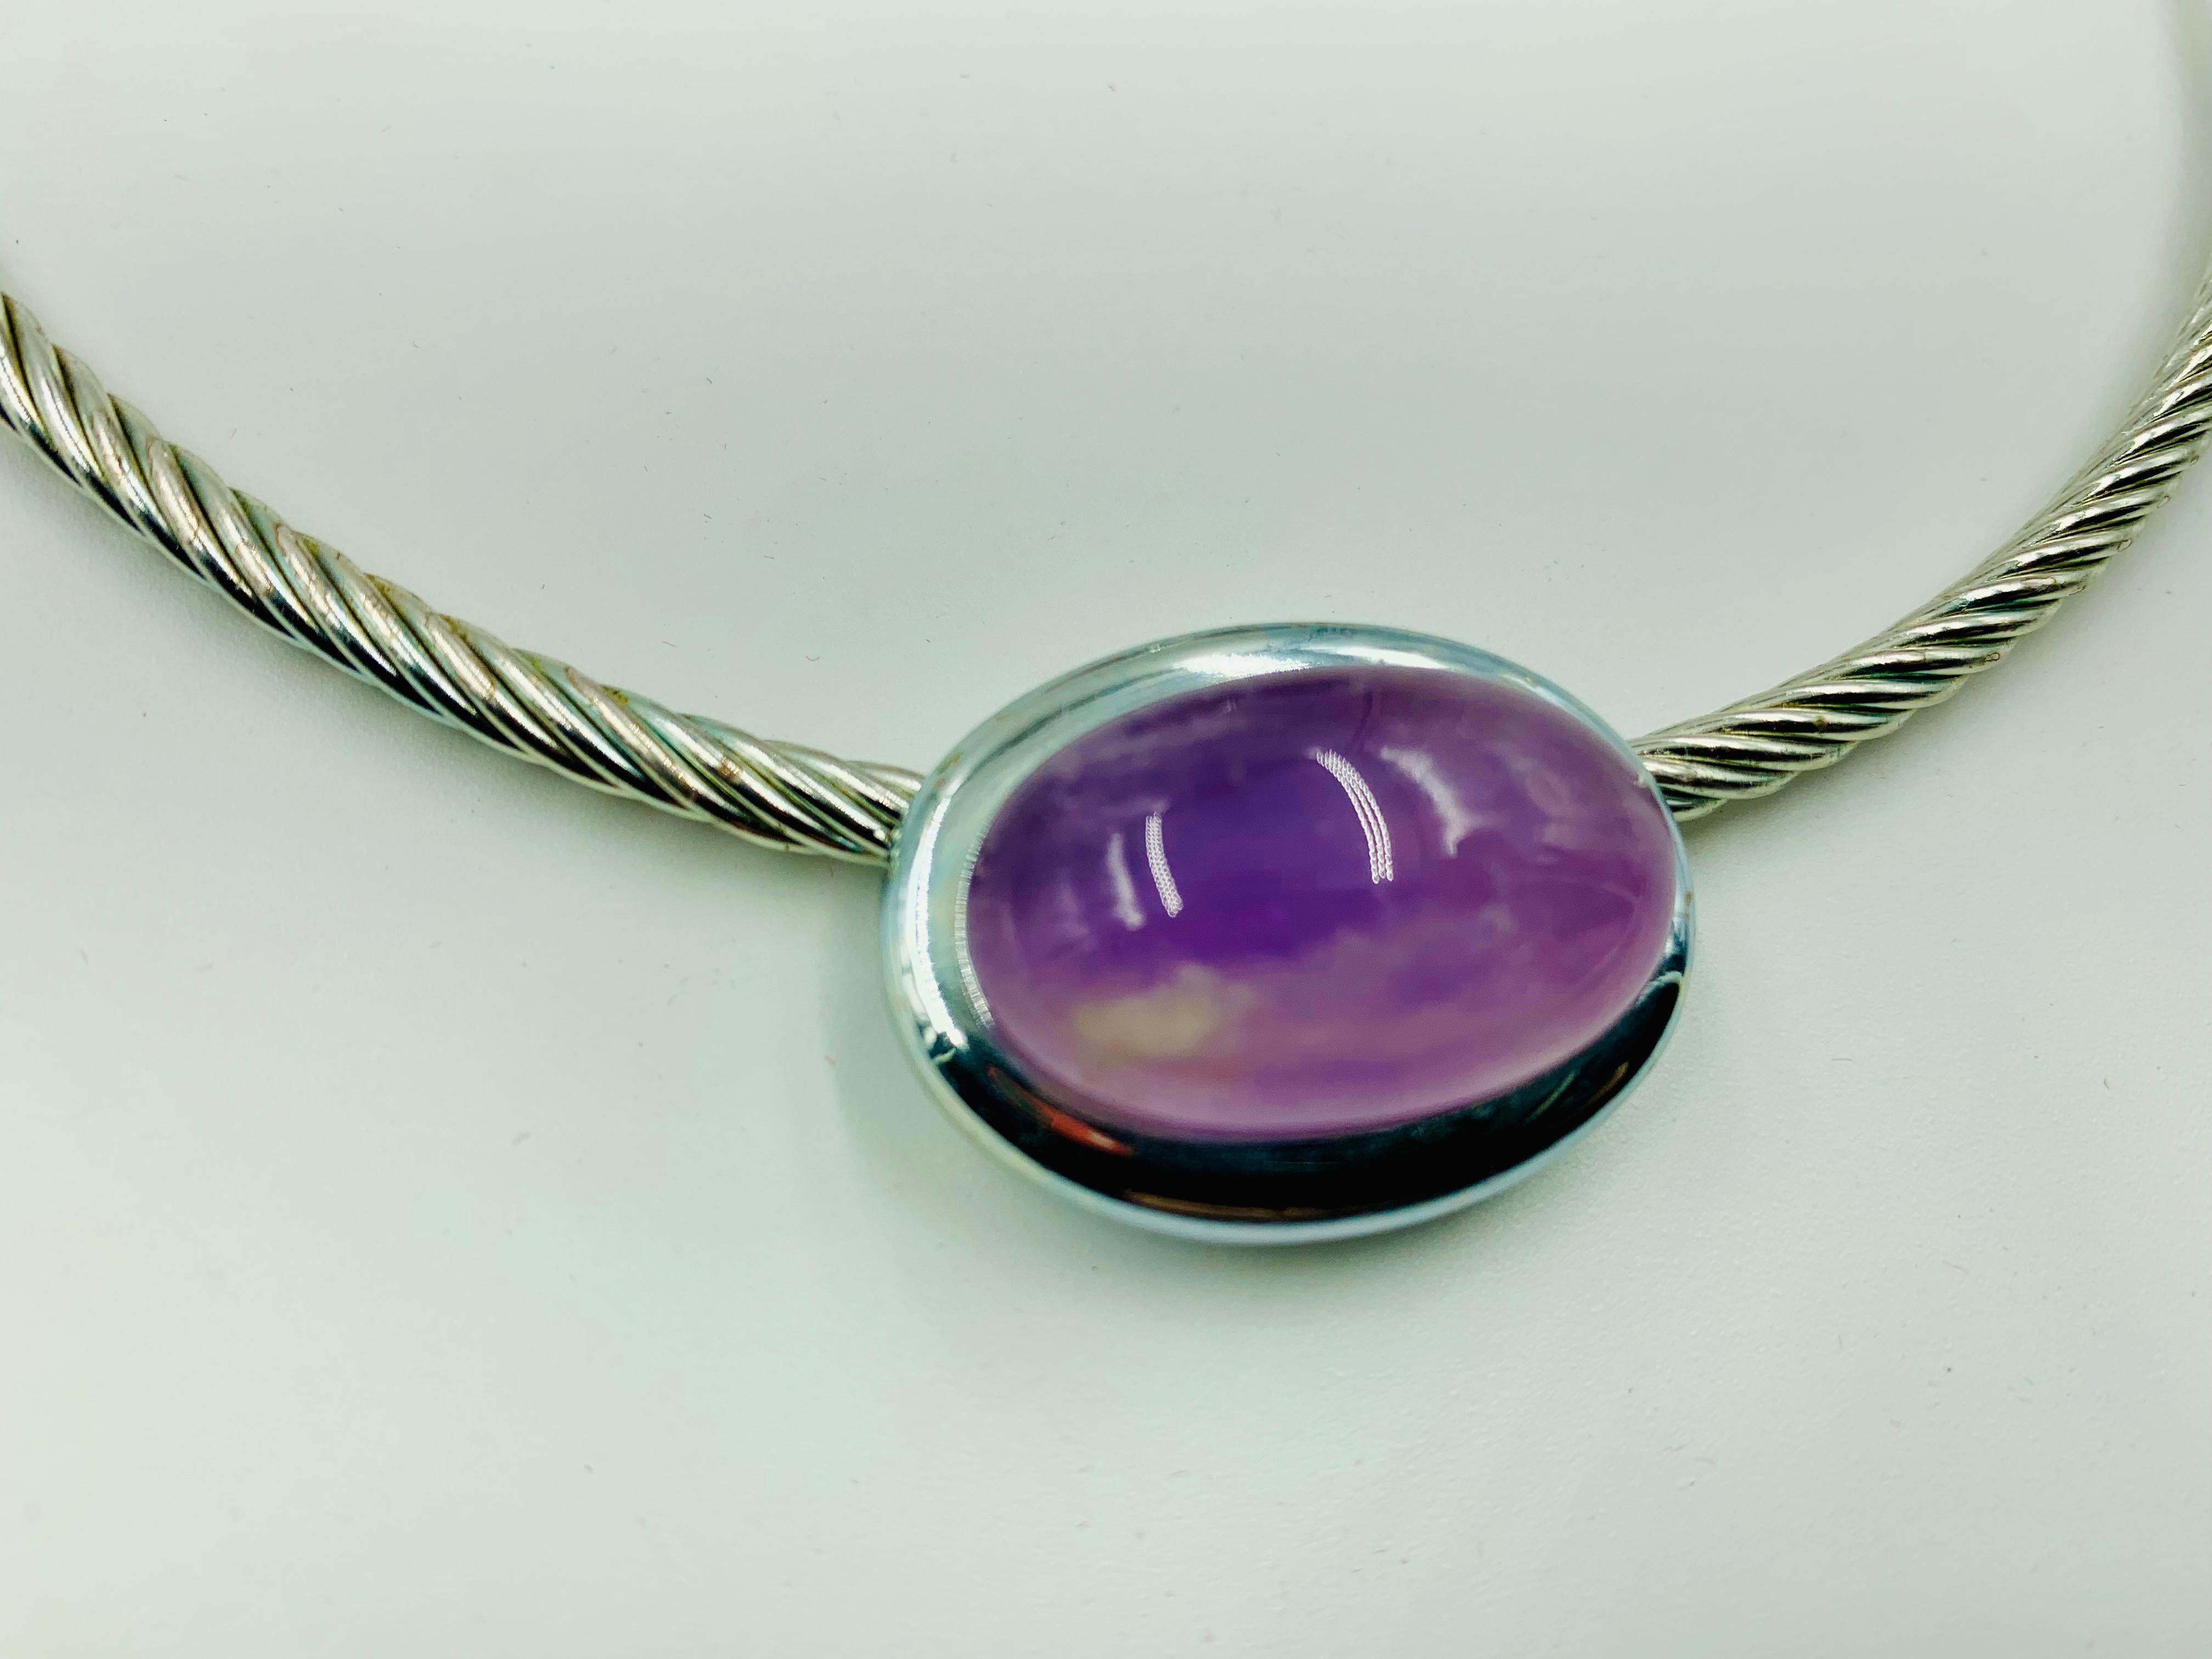 Vintage 1980's signed F. Romana large natural cabochon amethyst silvered metal torque necklace.
Excellent condition, light surface wear commensurate with age
Signed with monogram FR for Francesca Romana
Amethyst measures 25mm by 18mm, the stone with